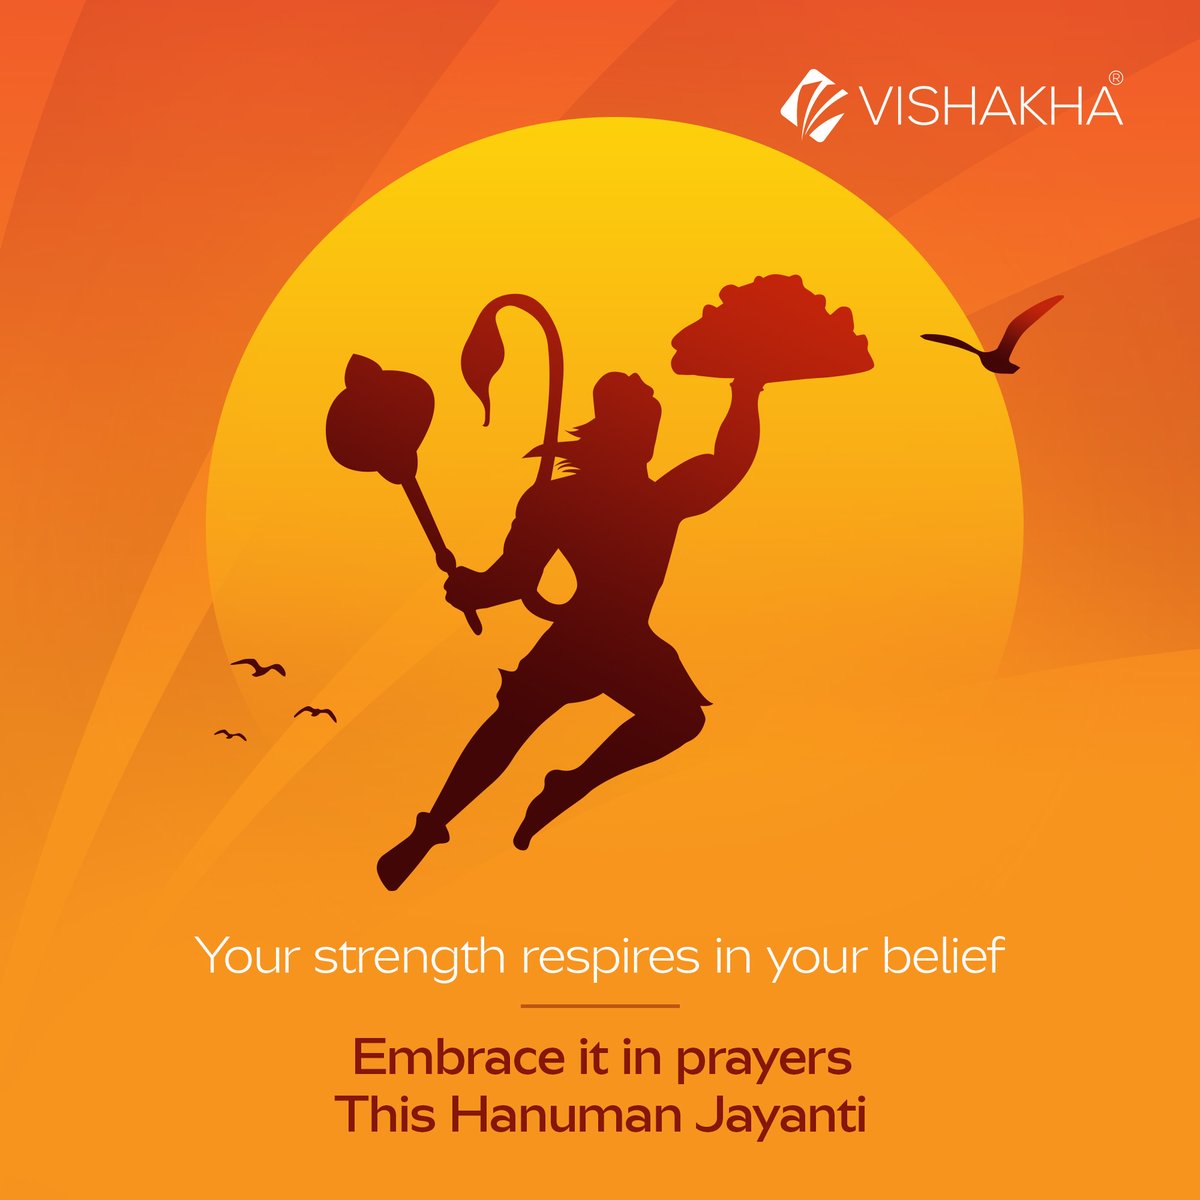 May the almighty bless you with immense strength to withstand every challenge. Vishakha family wishes all of you a Happy Hanuman Jayanti.
.
.
.
.
#vishakha #vishakhagroup #vishakharenewables 
#vishakhamouldings #vishakhapipes #vishakhapolyfab #hanumanjayanti #hanumanjayanti2024